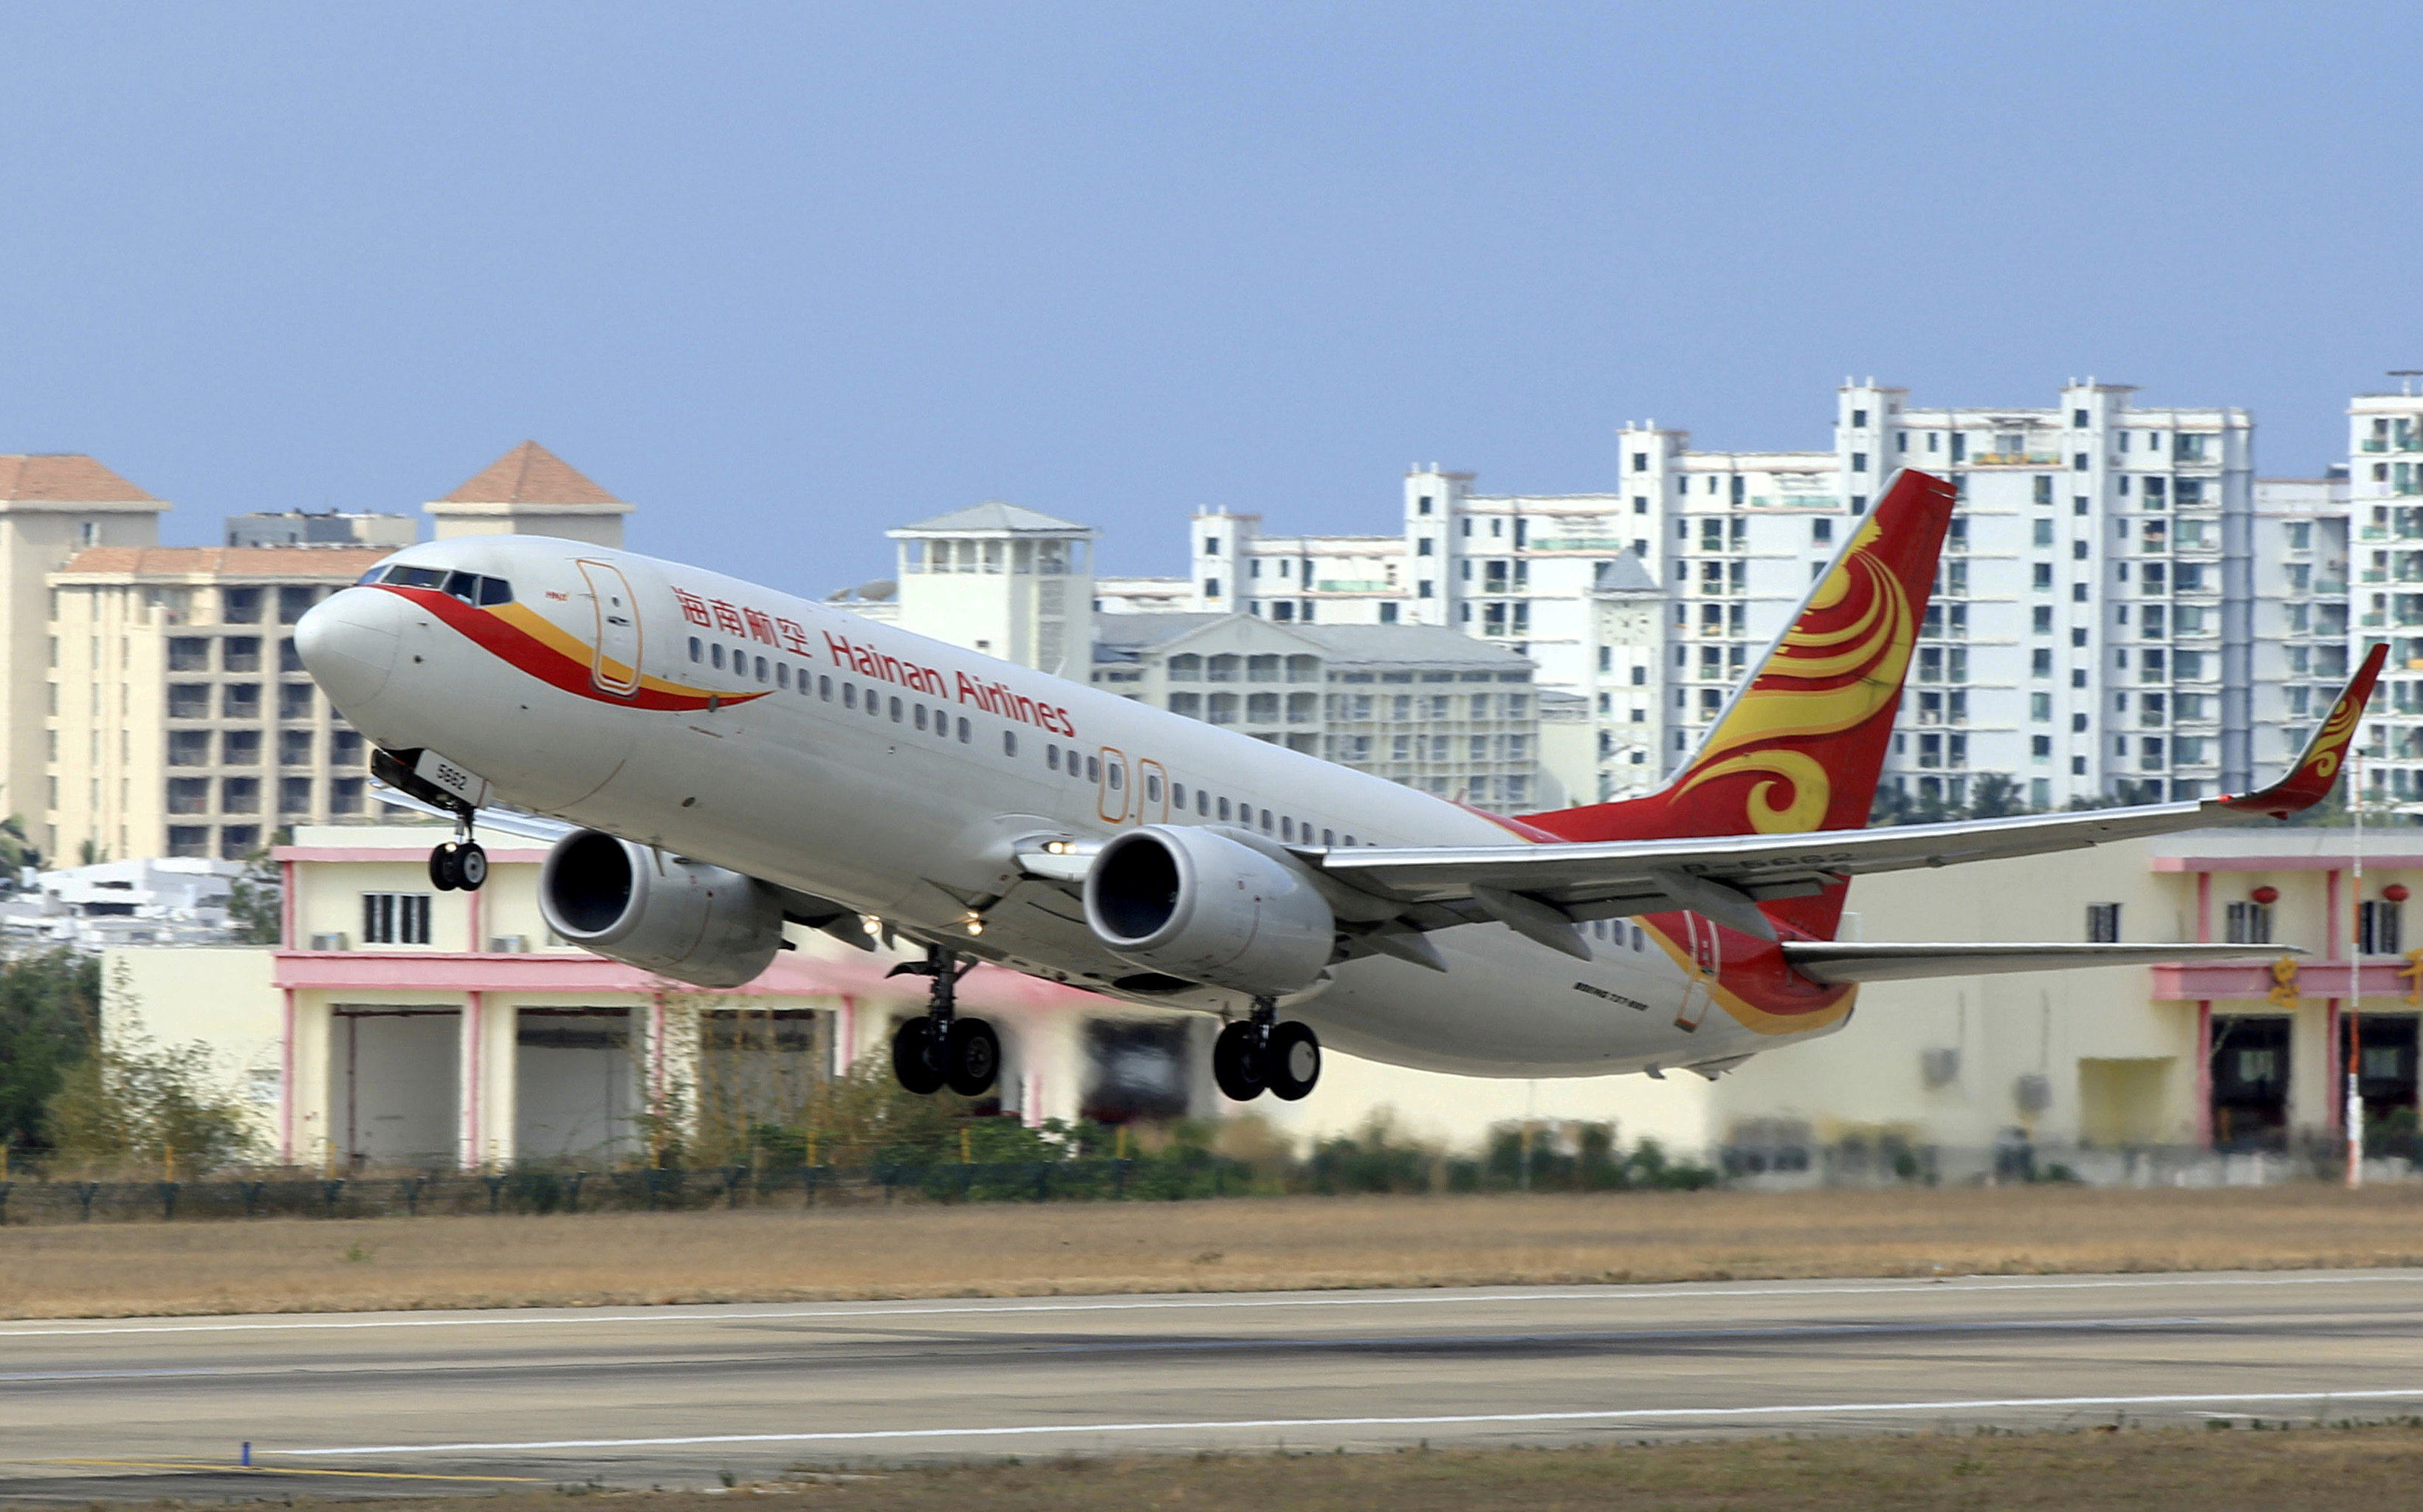 Hainan Airlines was the foundation on which magnate Chen Feng built his conglomerate, which spanned hotels to financial institutions. Photo: Reuters